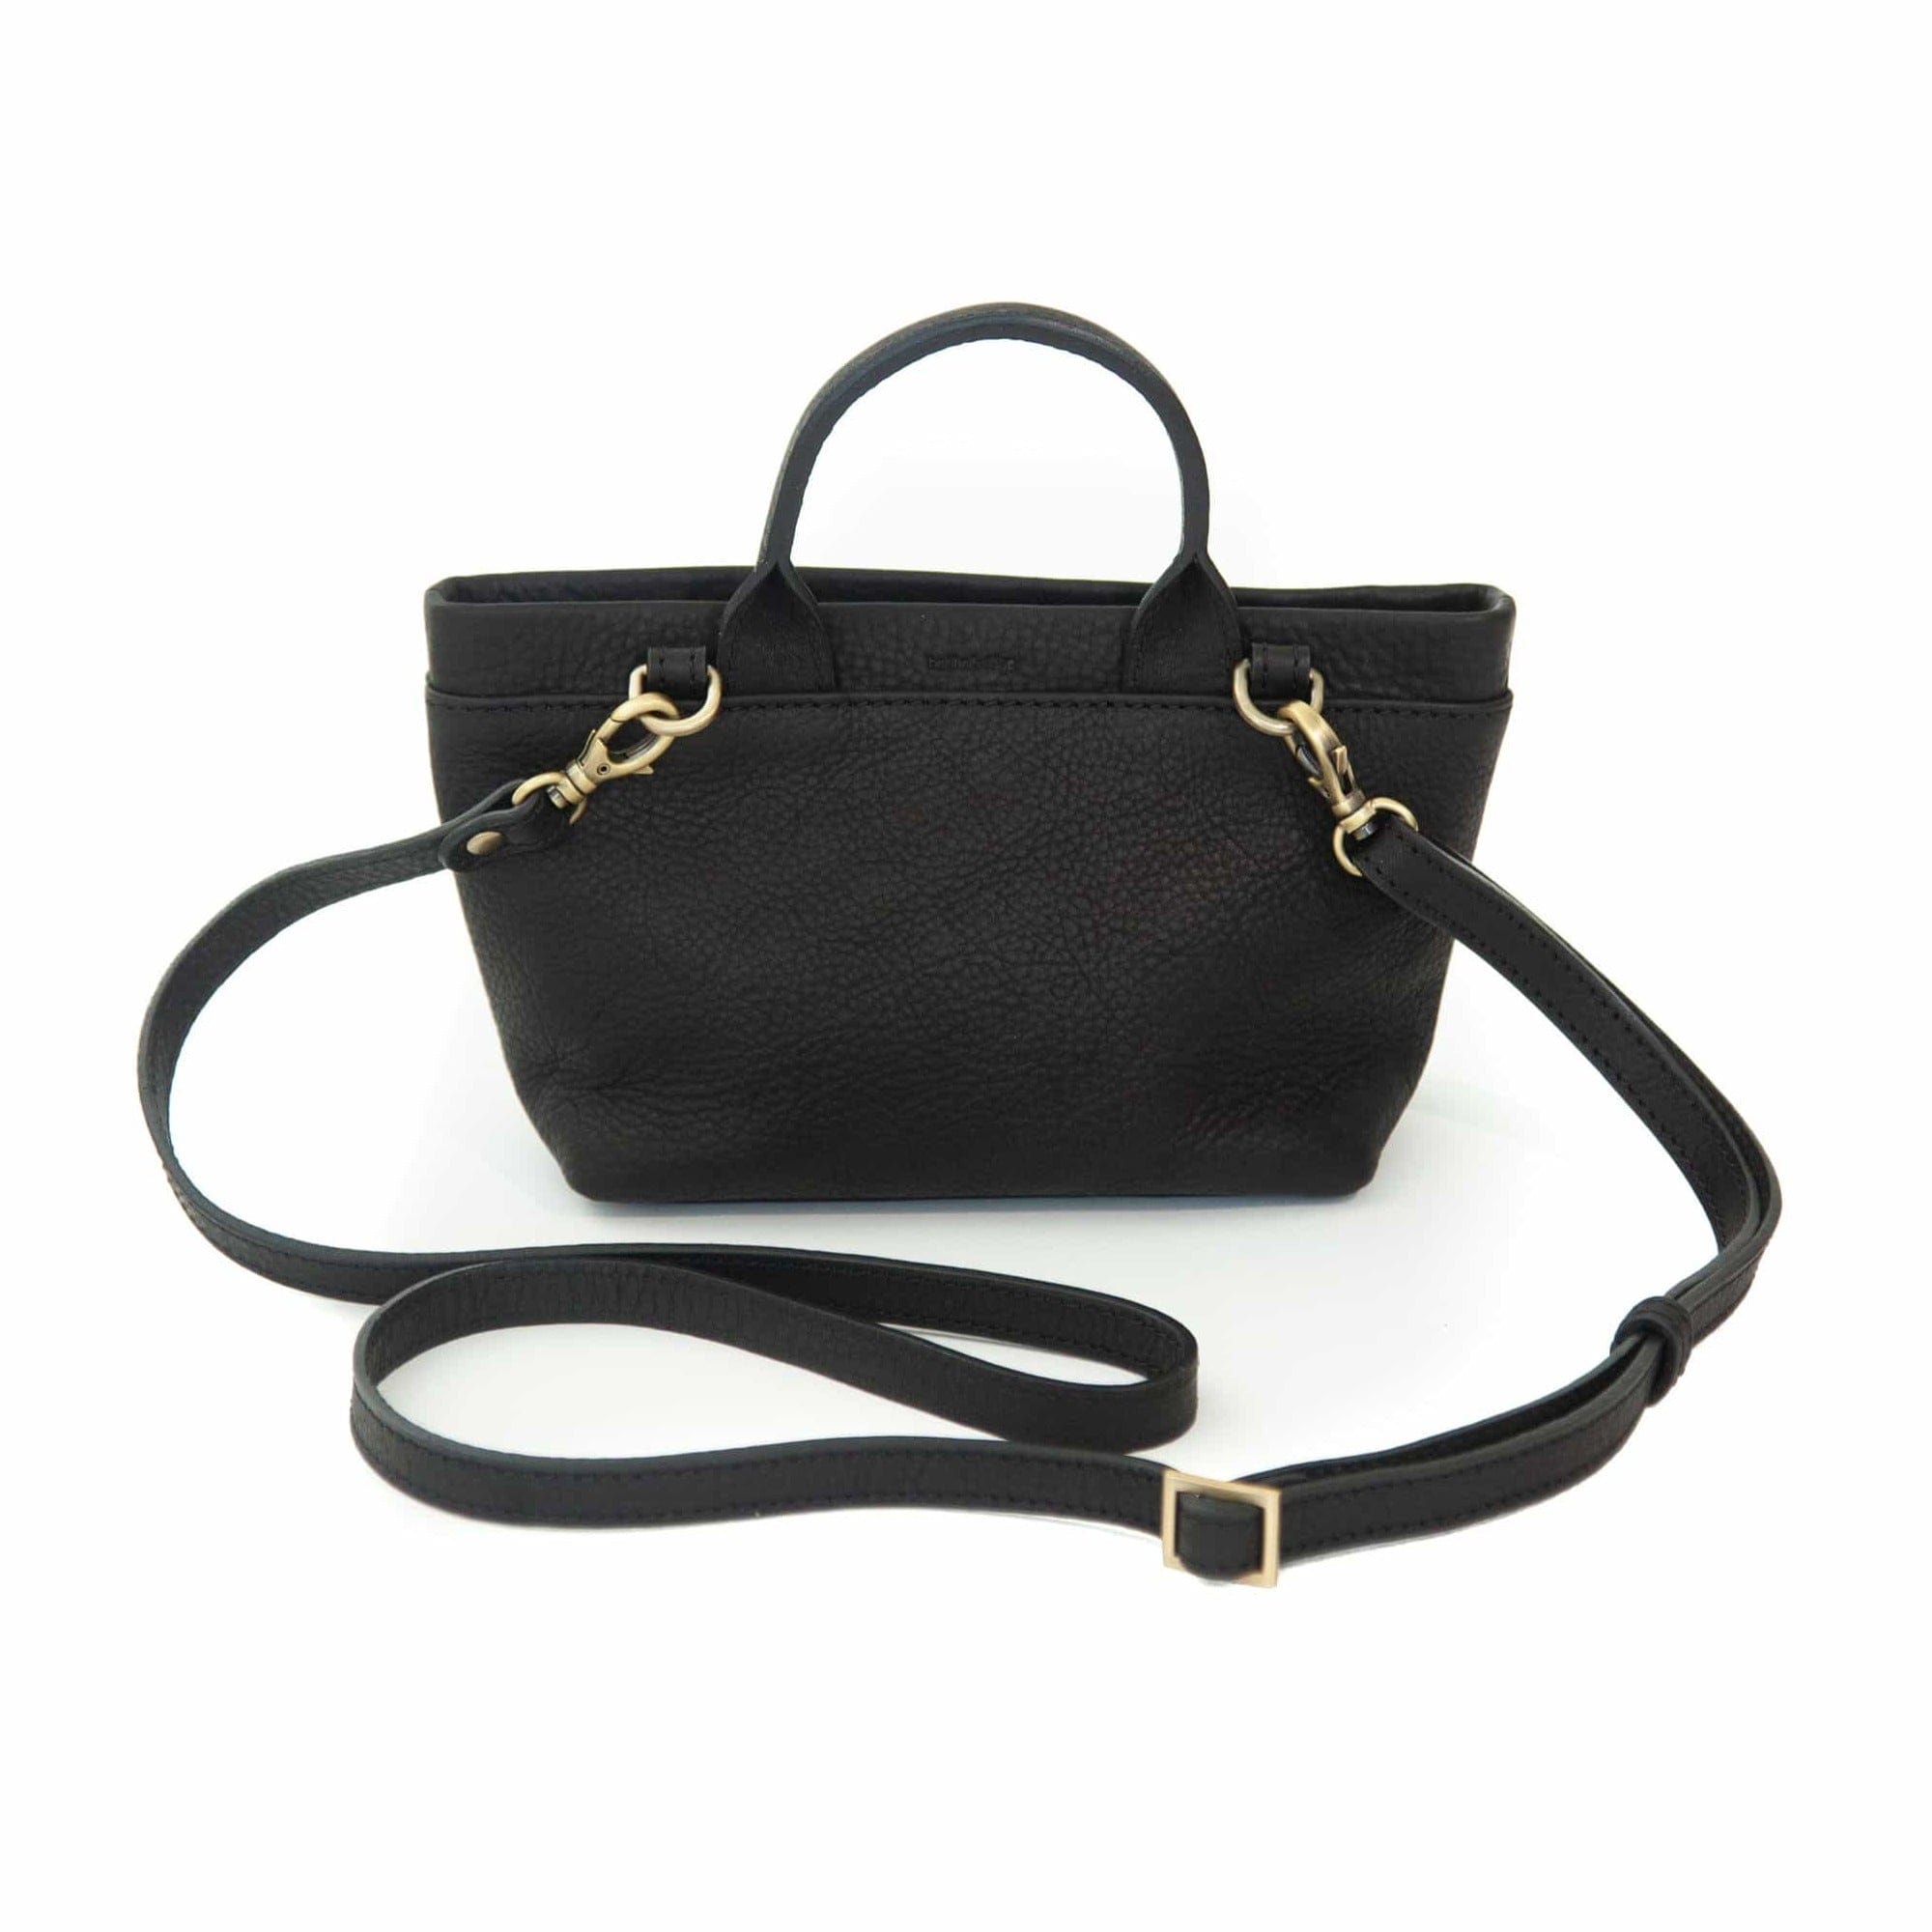 The Roger mini crossbody bag in black raw leather has an adjustable and removable strap.